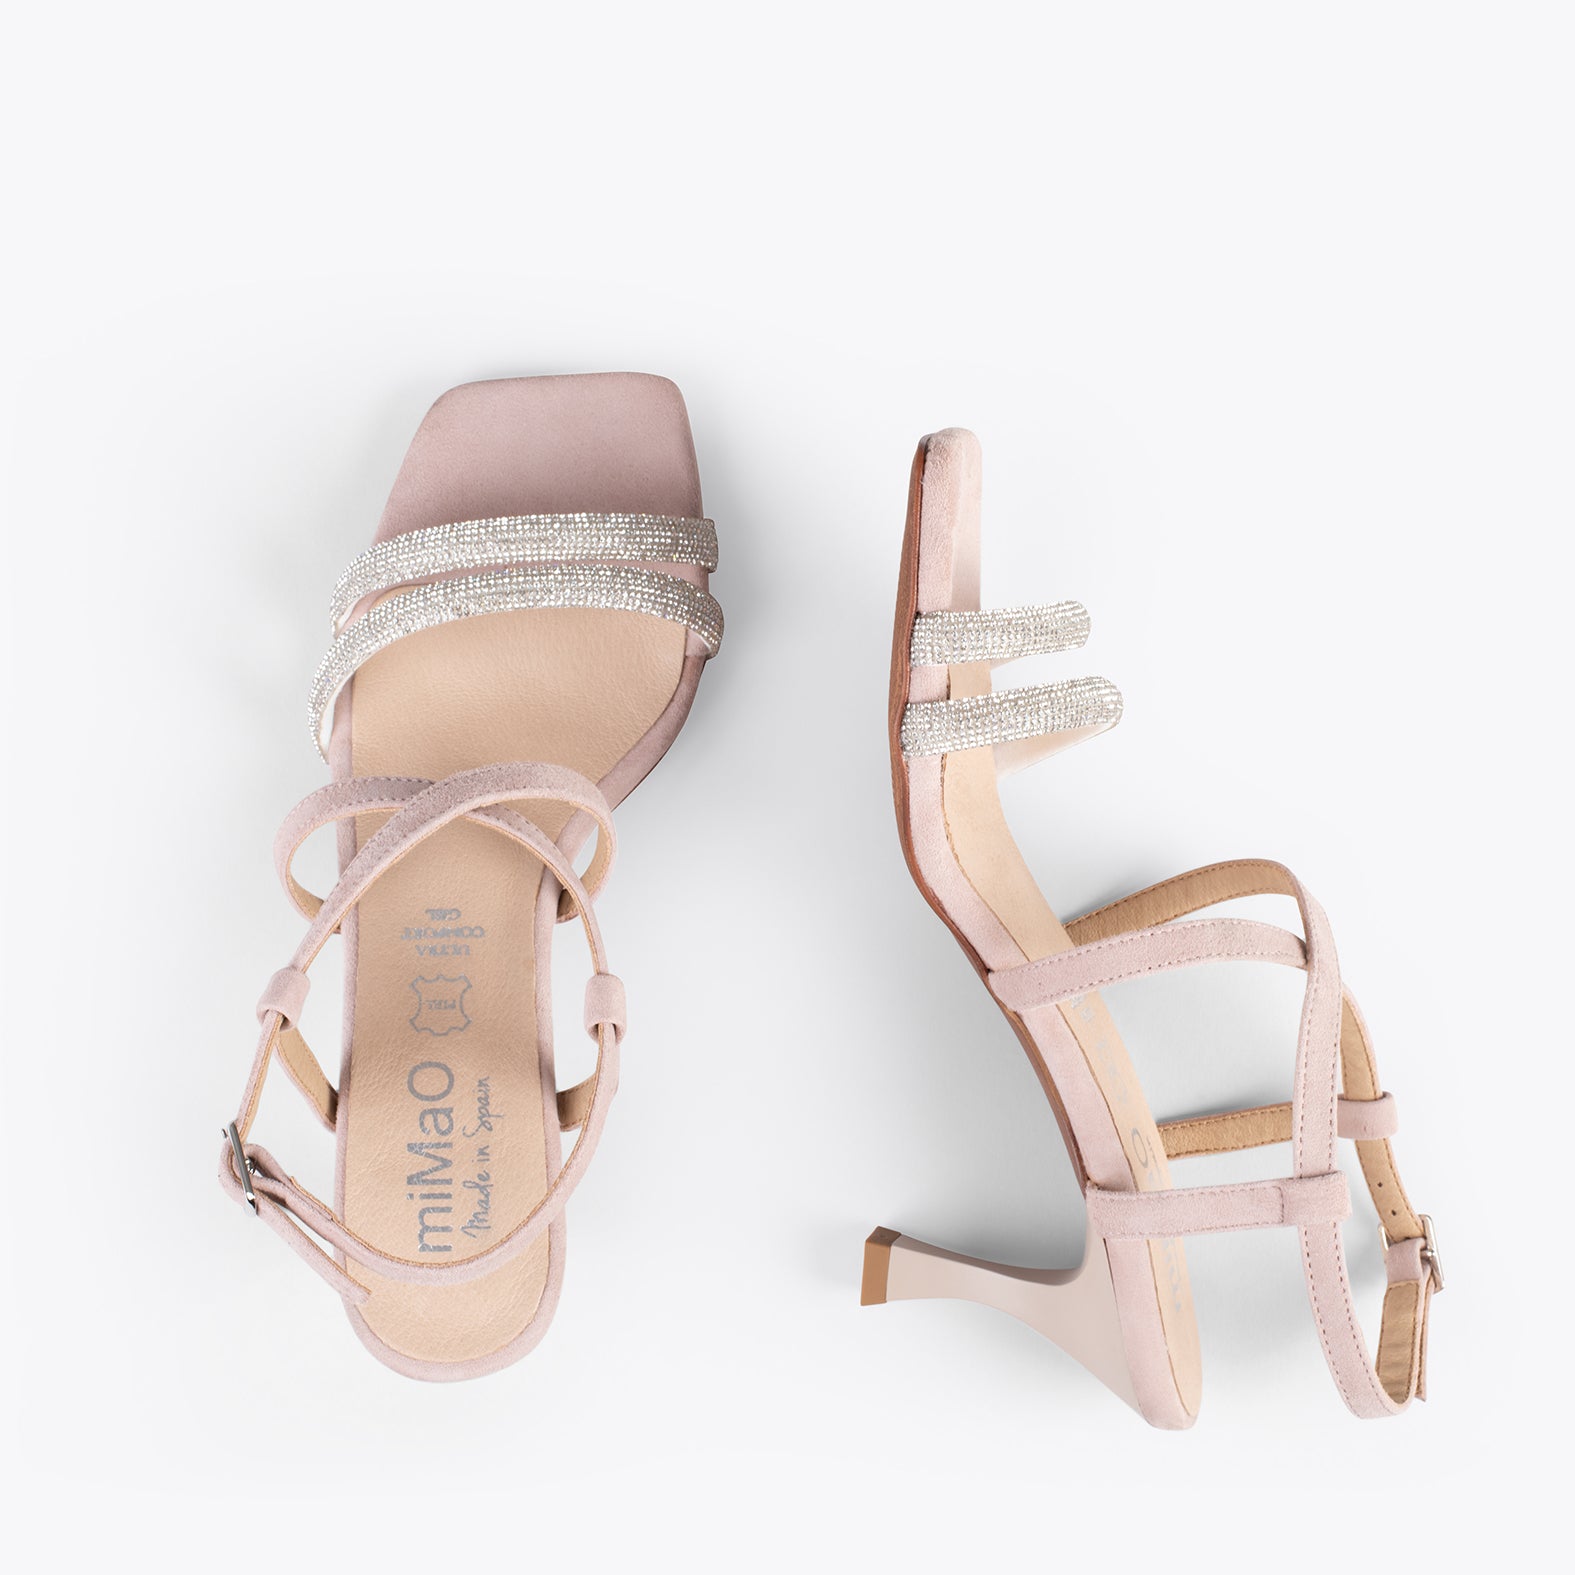 SHINY – NUDE high heel sandals with strass straps